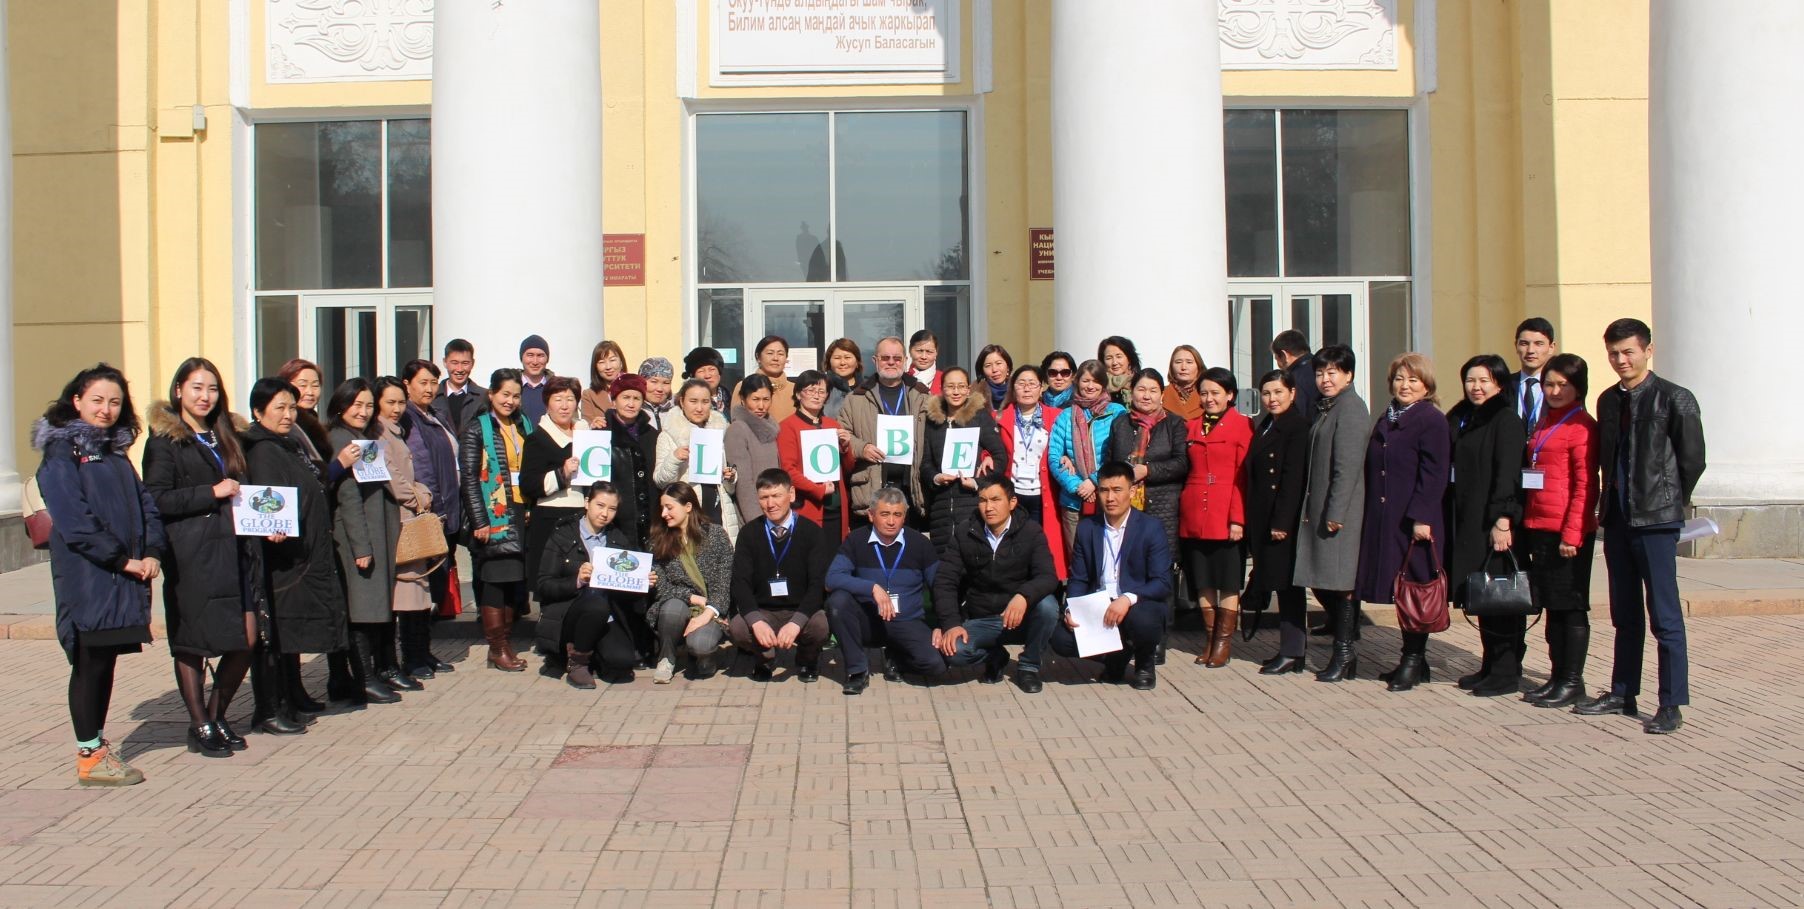 Participants in teacer training event in Kyrgyz Republic, February 2019.